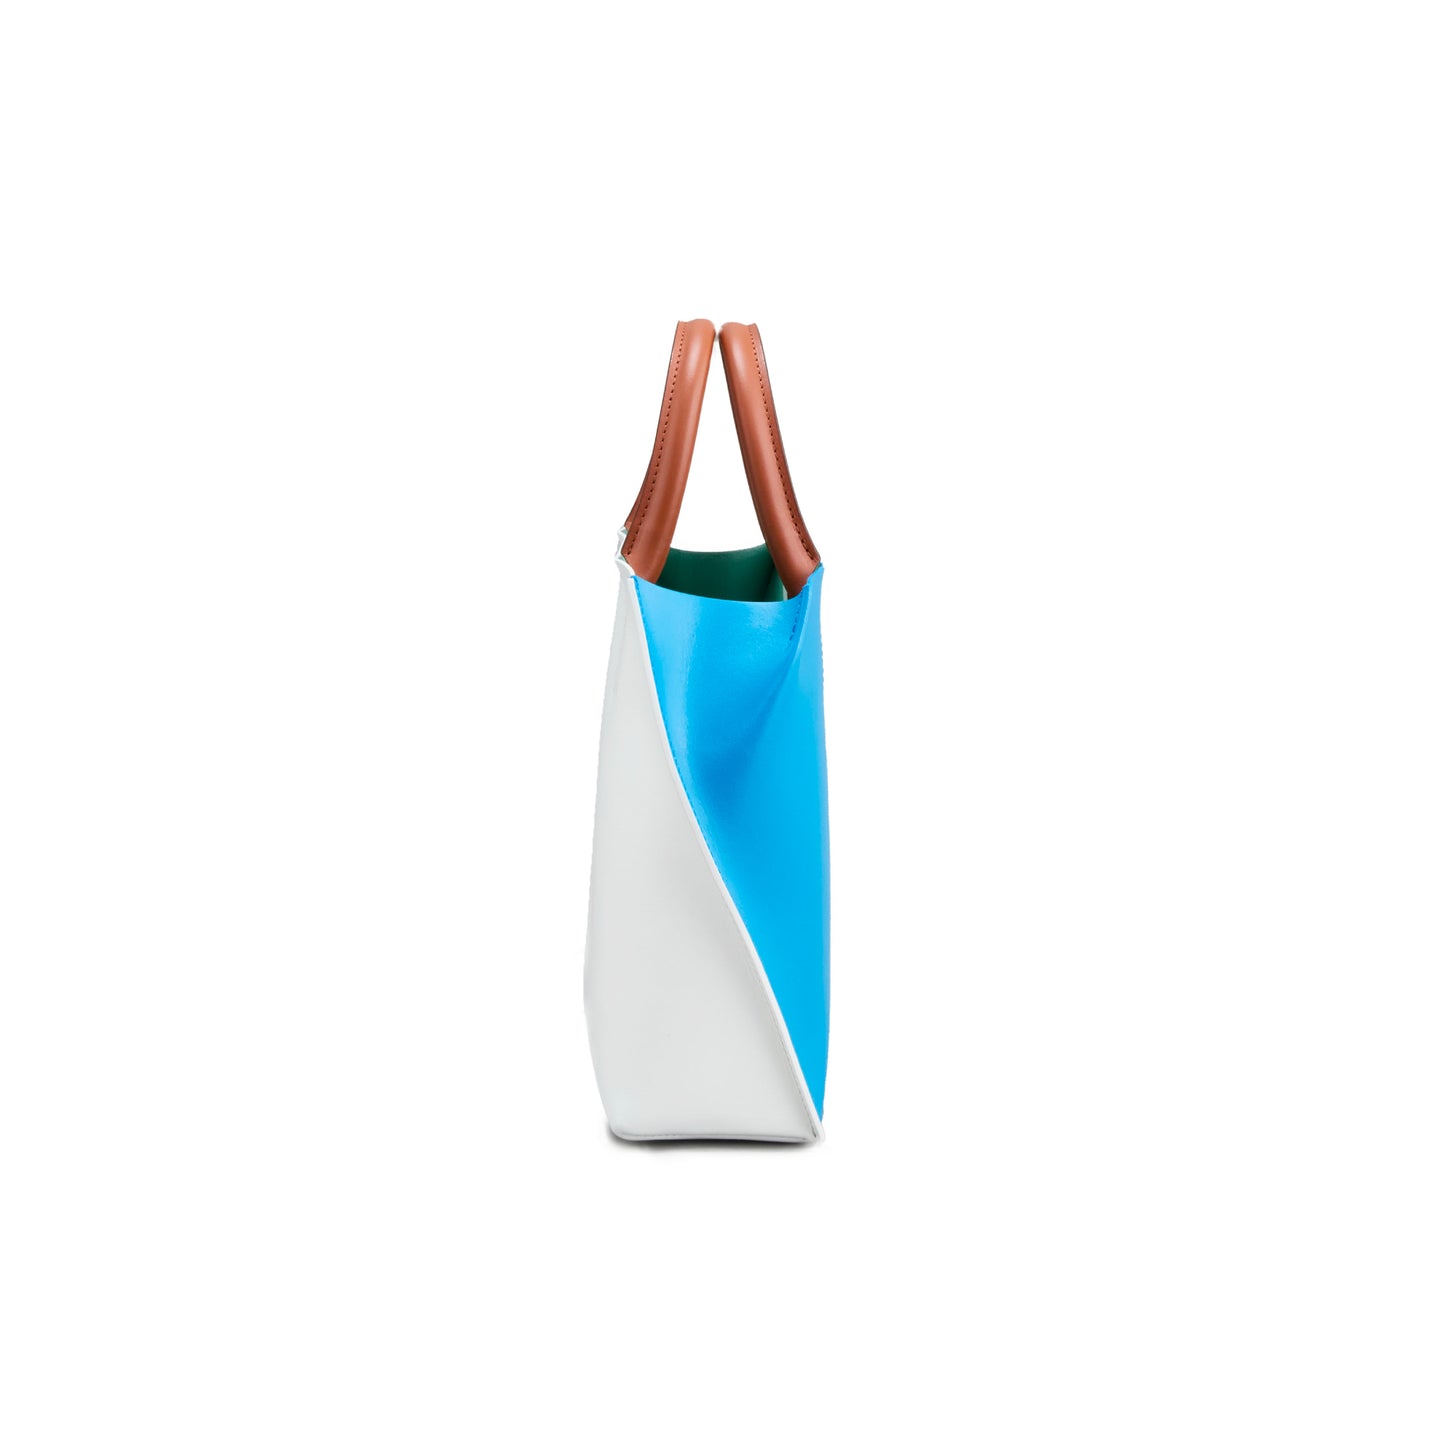 [Courtney Orla] SLOPE tote S Smooth L. - White Multi